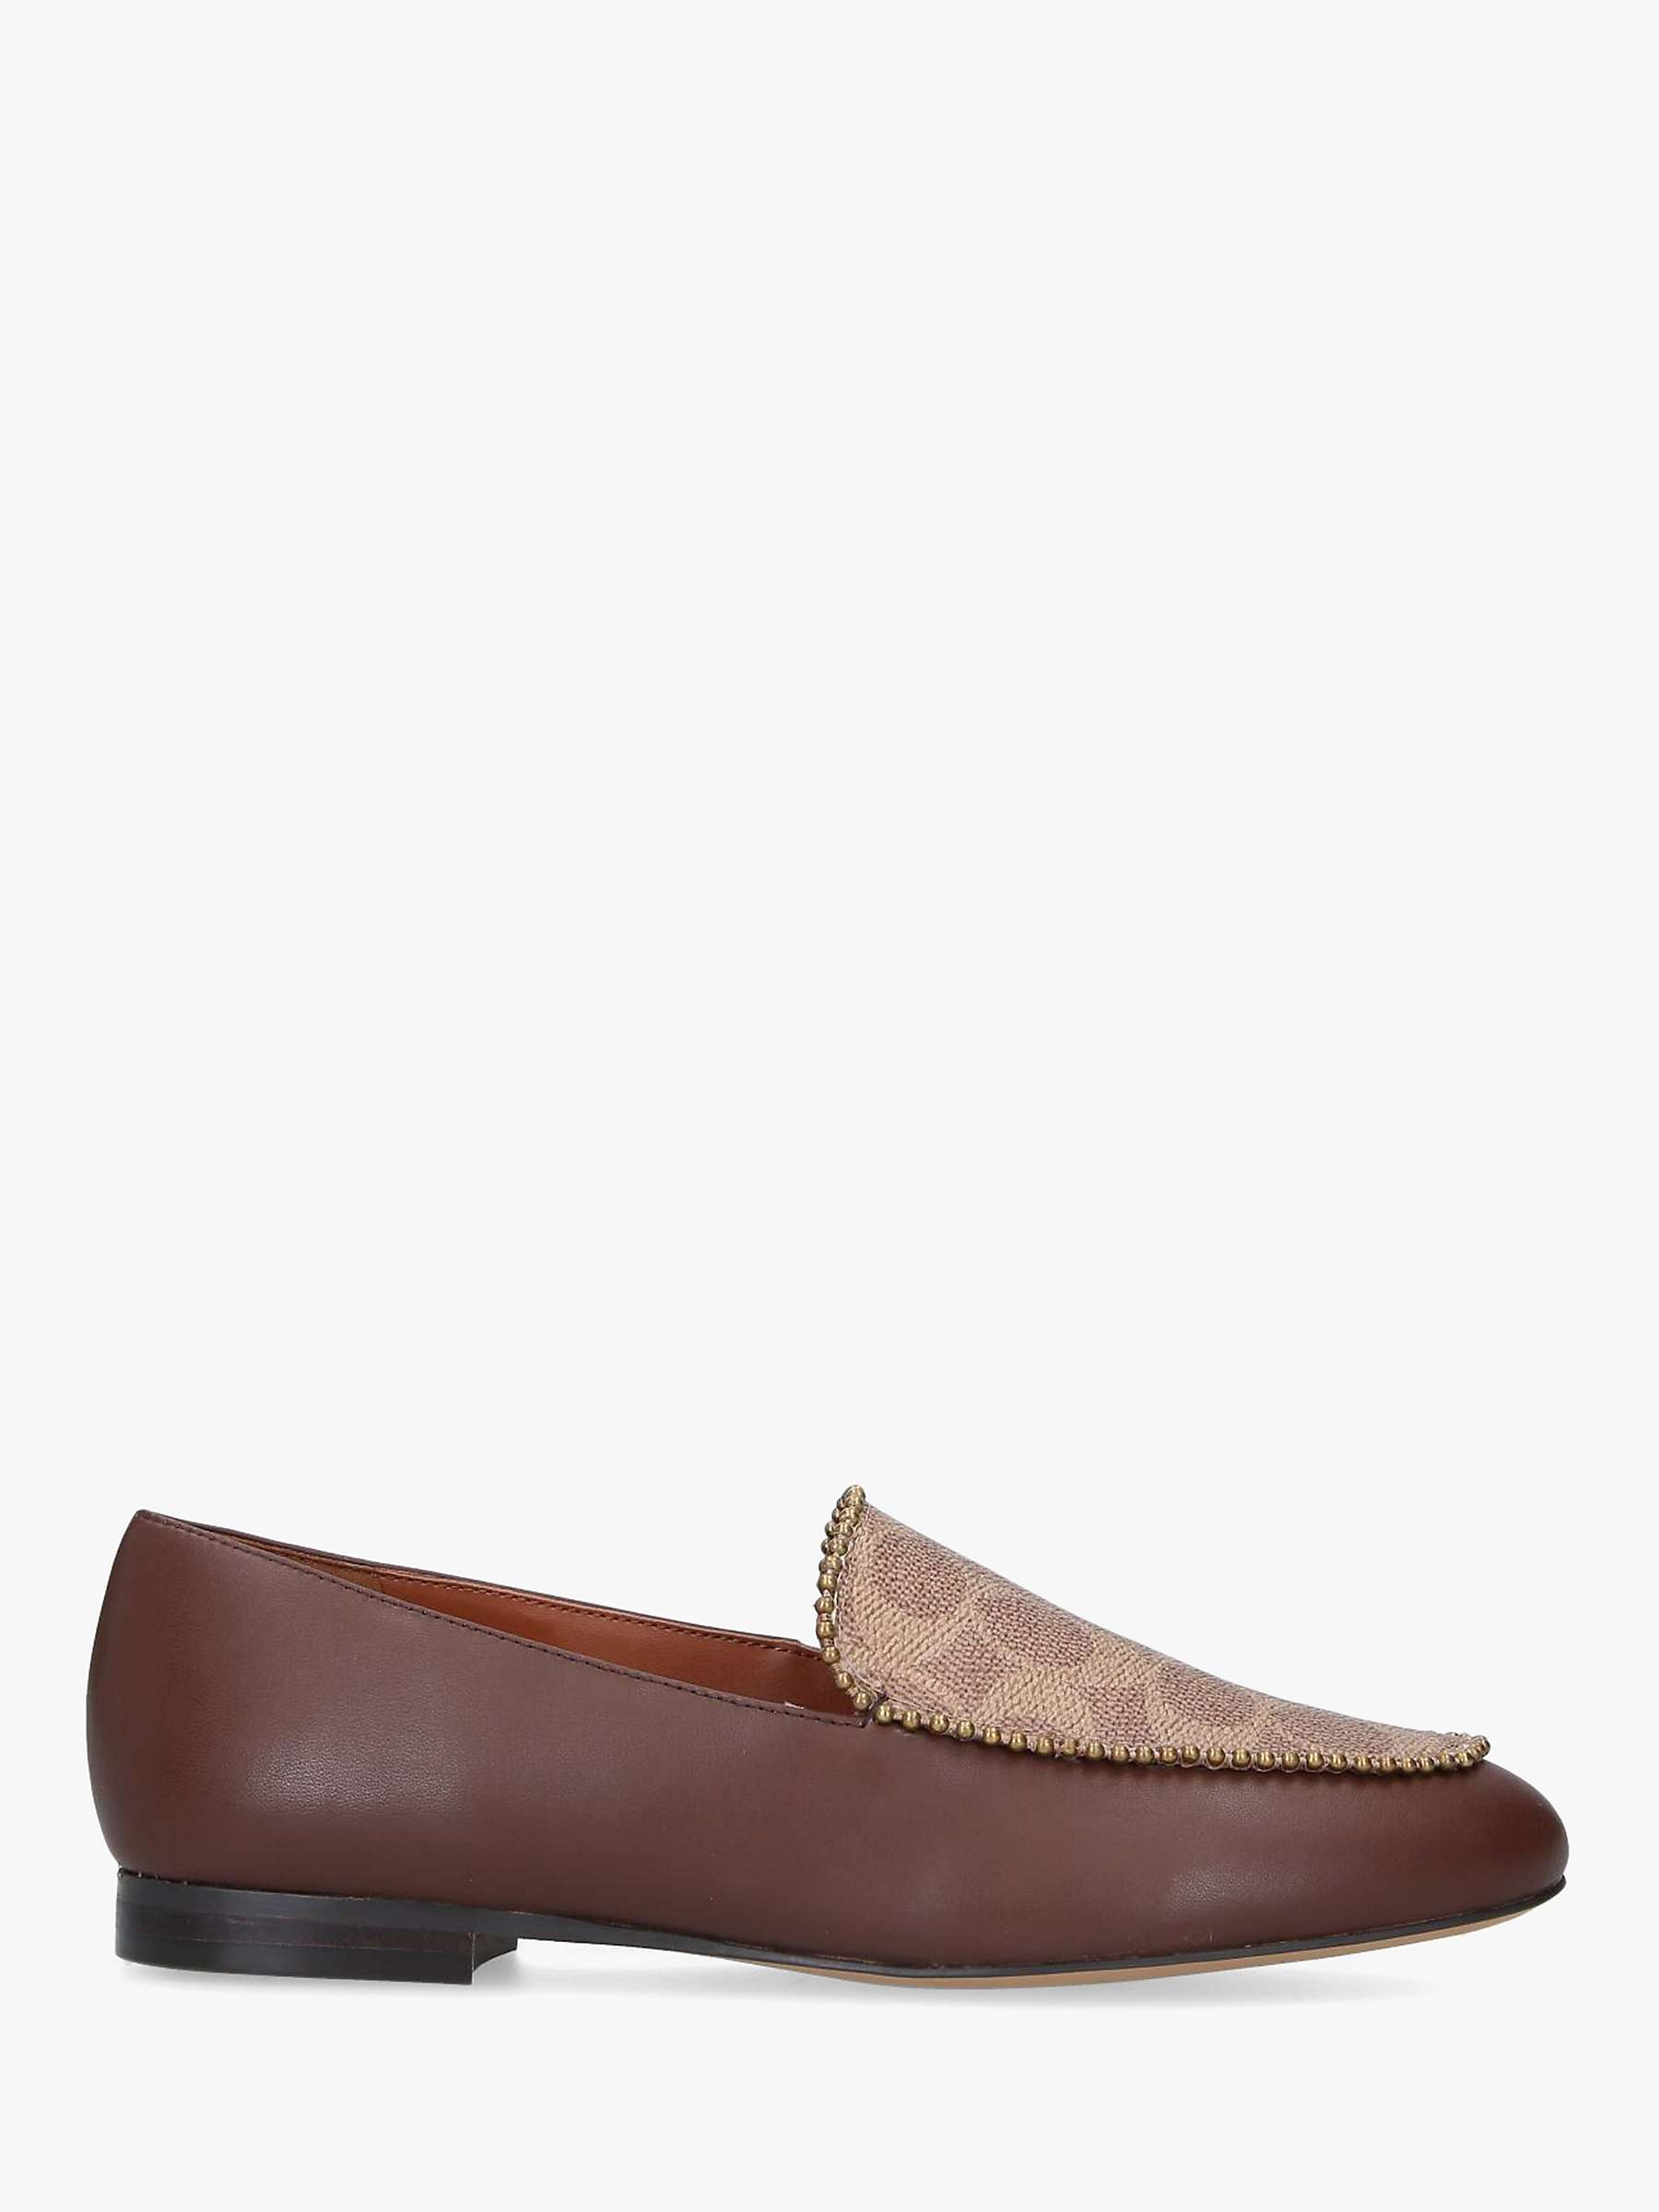 Buy Coach Harper Signature Loafers, Multi Brown Online at johnlewis.com